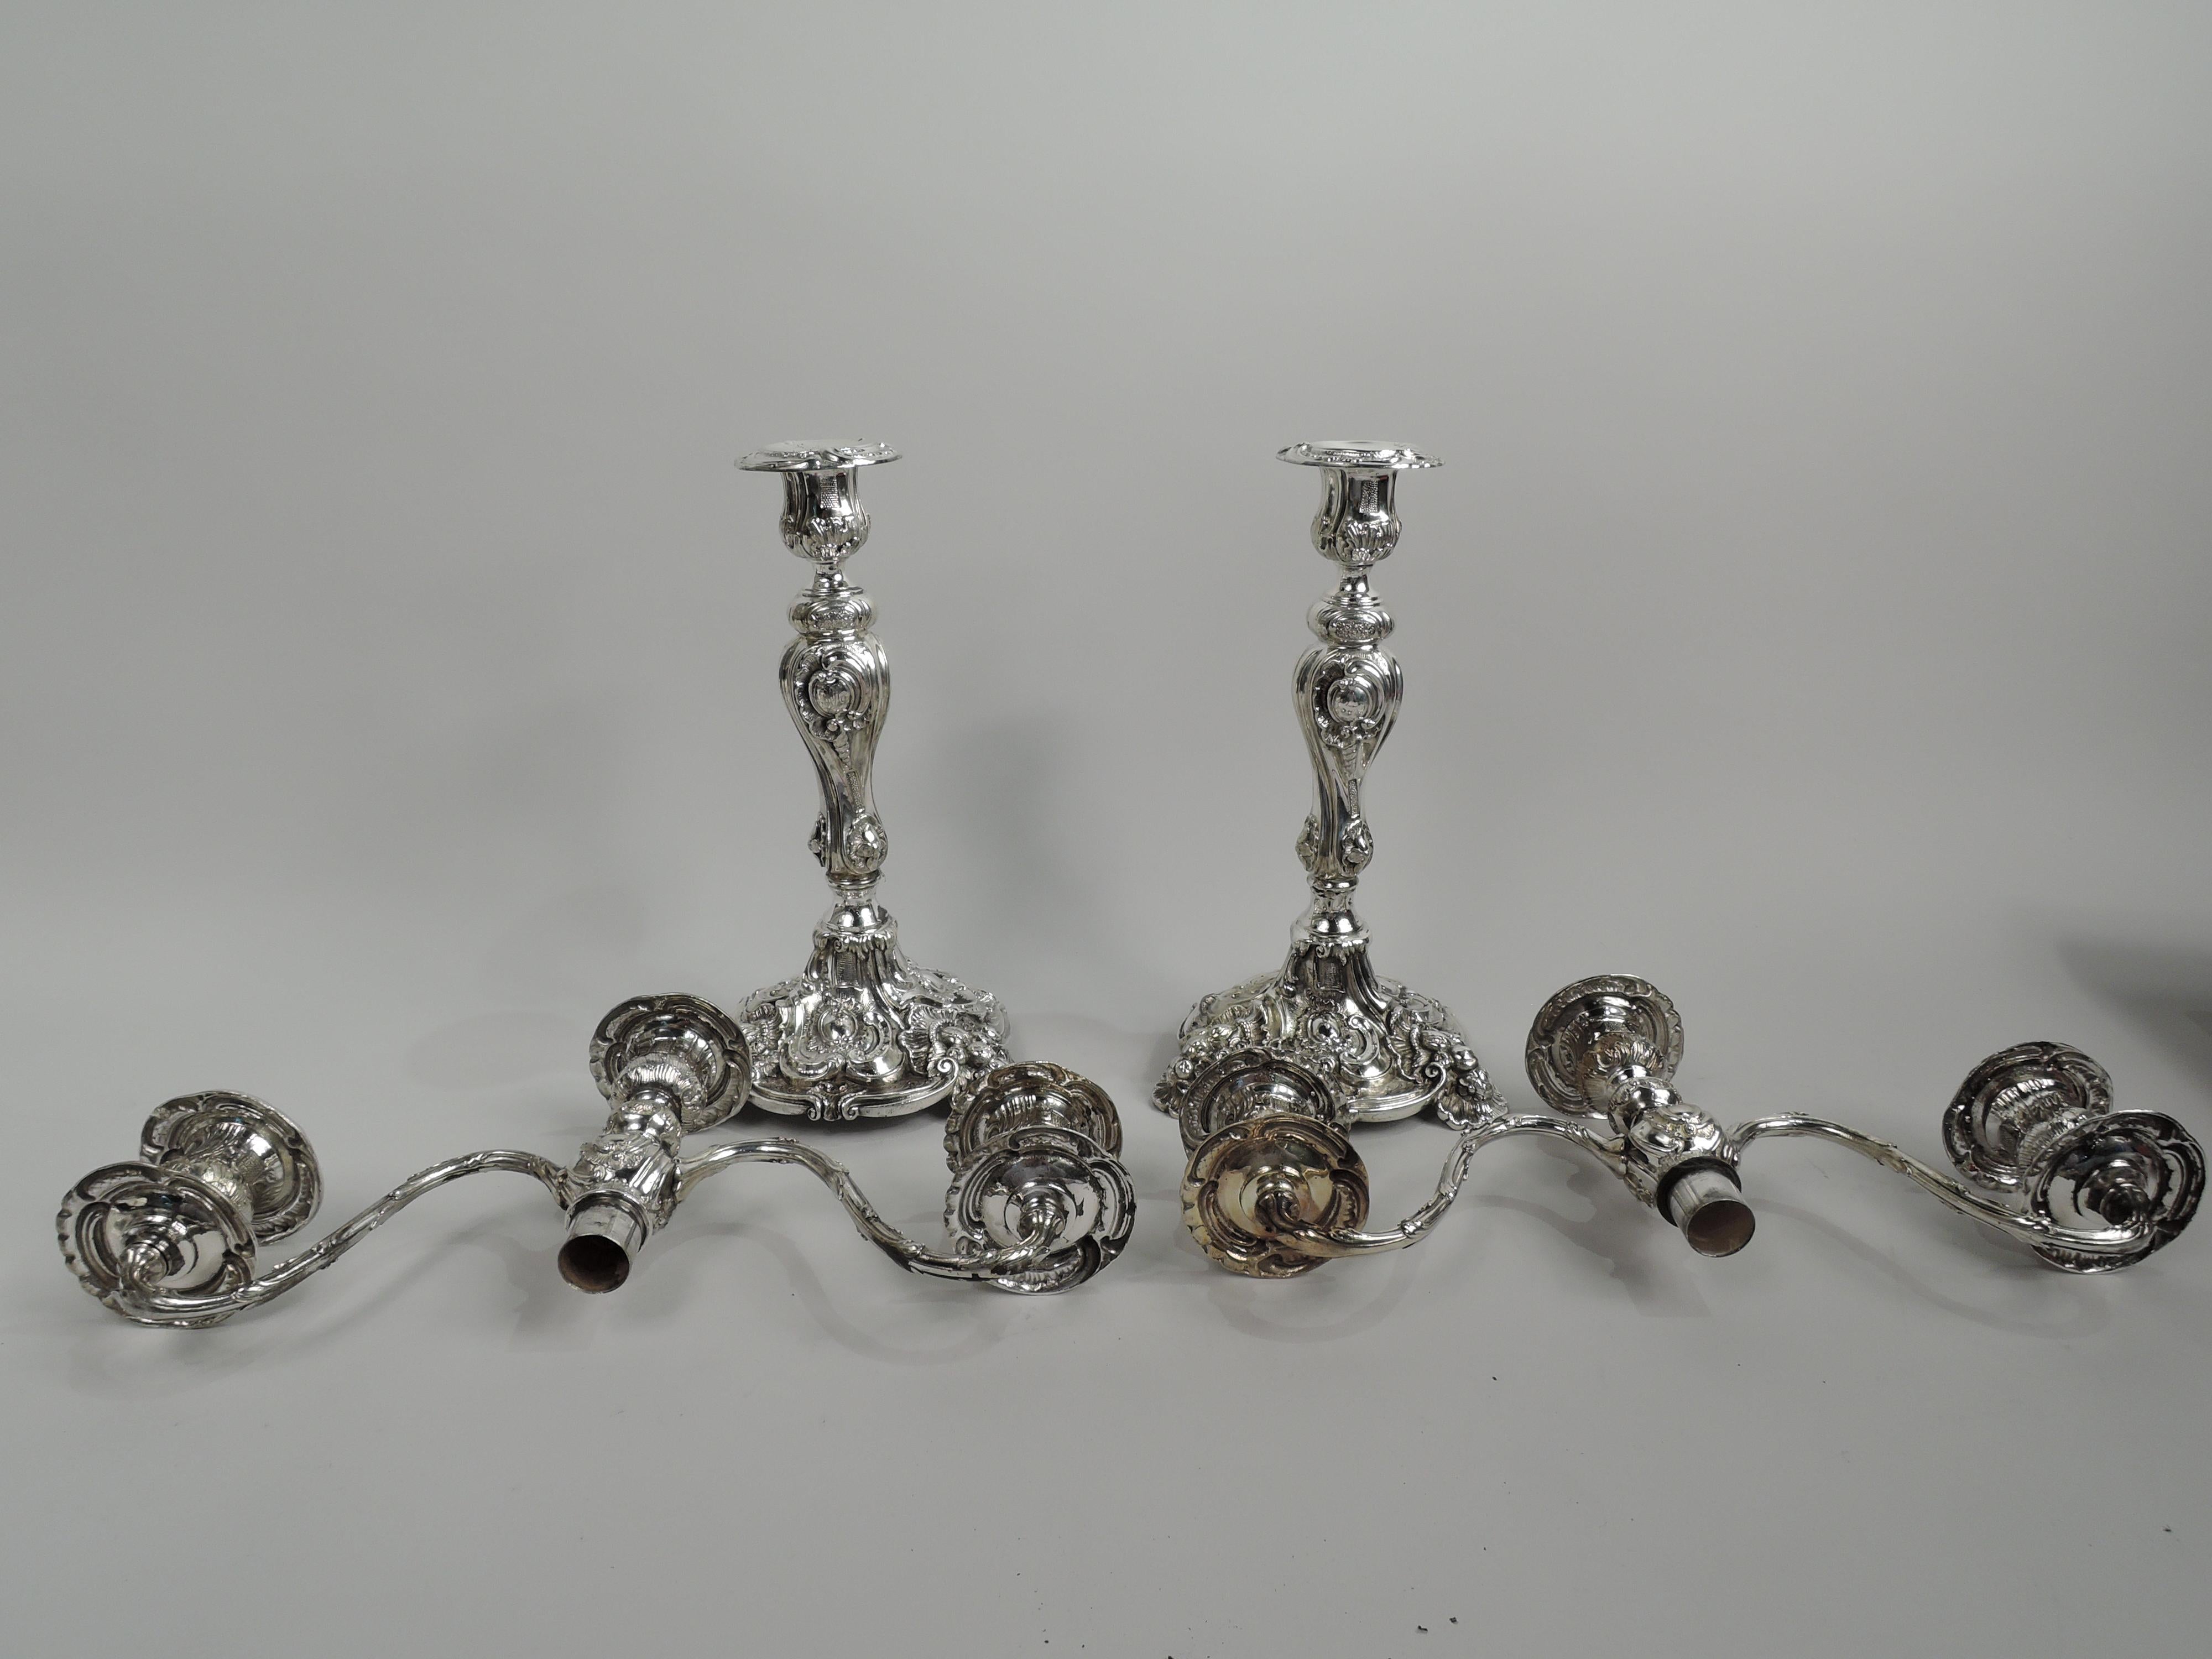 Pair of Rococo Revival sterling silver 3-light candelabra, ca 1928. Retailed by JE Caldwell in Philadelphia. Each: Raised socket on knopped baluster mounted with 2 leaf-wrapped s-scroll arms, each terminating in single socket. Sockets have